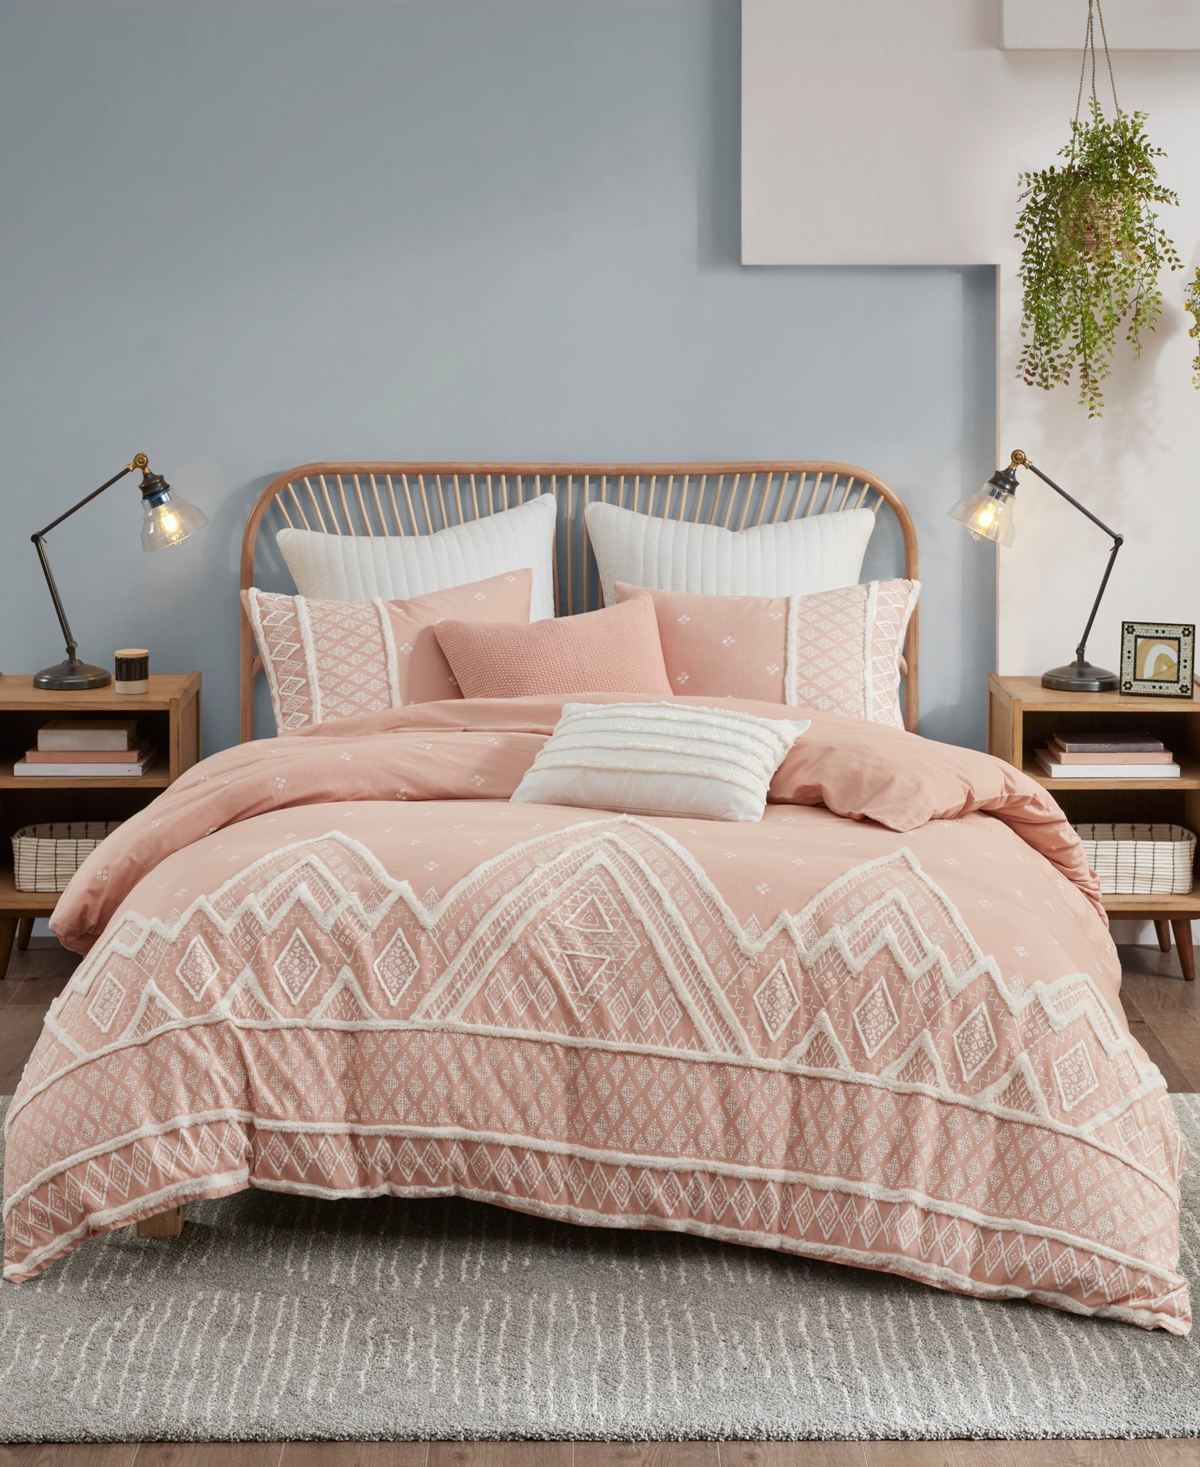 Ink+ivy Marta 3 Piece Count Duvet Cover Set, King/ Cal King Bedding In Blush